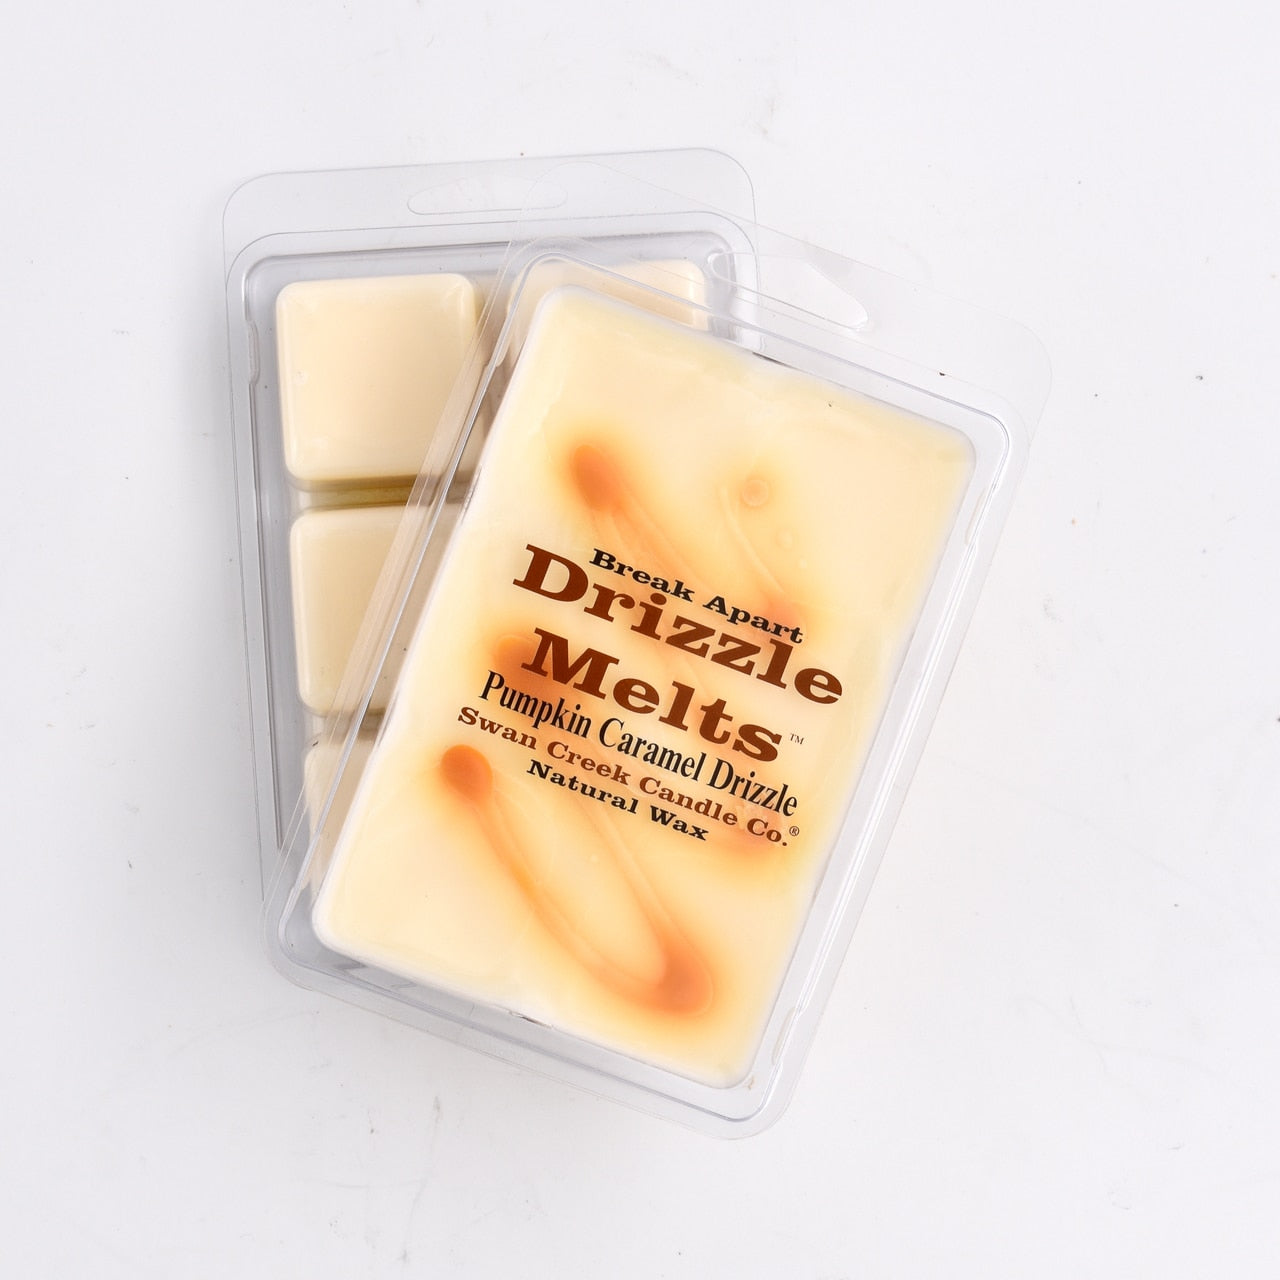 Swan Creek Drizzle Melts Snickerdoodle